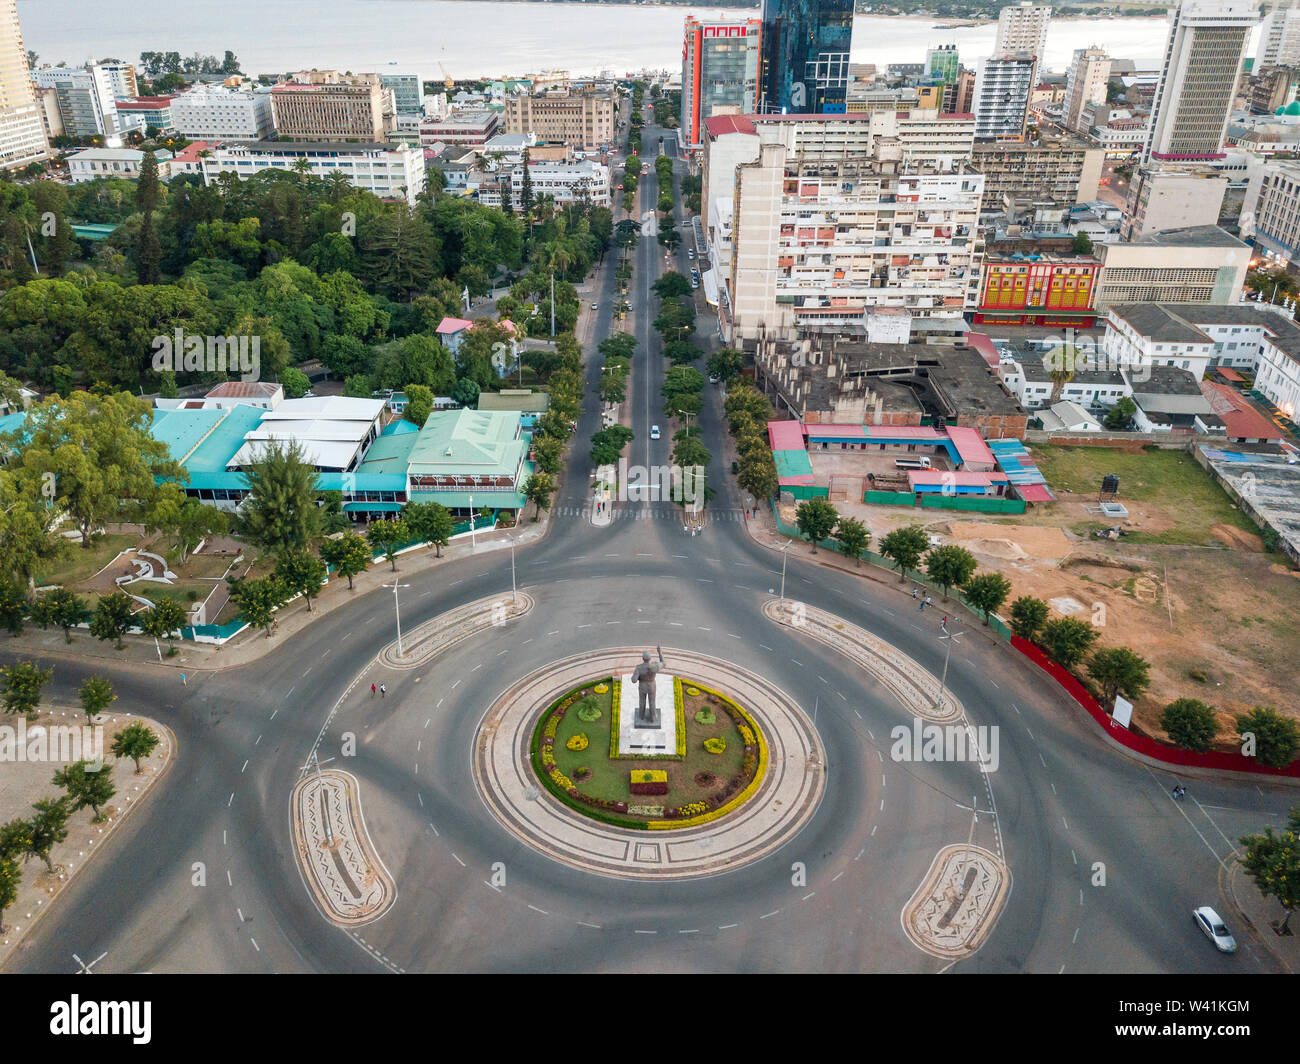 Aerial view of Independence square with a statue of first president Samora Machel, Maputo, Mozambique Stock Photo